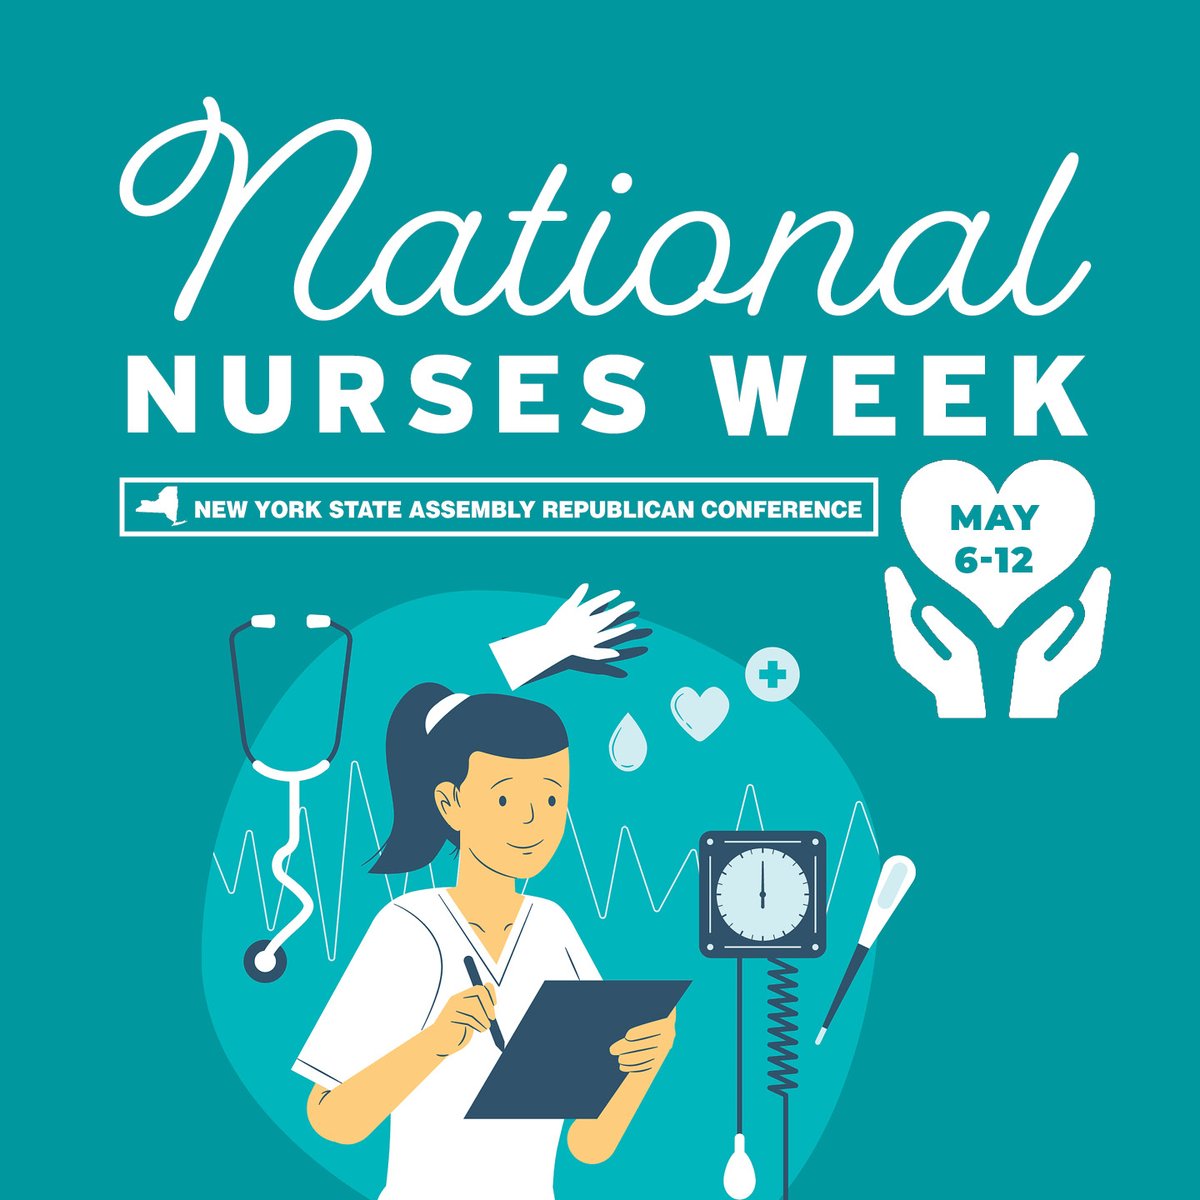 National Nurses Week is an opportunity to recognize the service and dedication of nurses in healthcare facilities across the state. Their contribution to the state’s healthcare workforce is invaluable as they play a pivotal role in the direct care of patients.